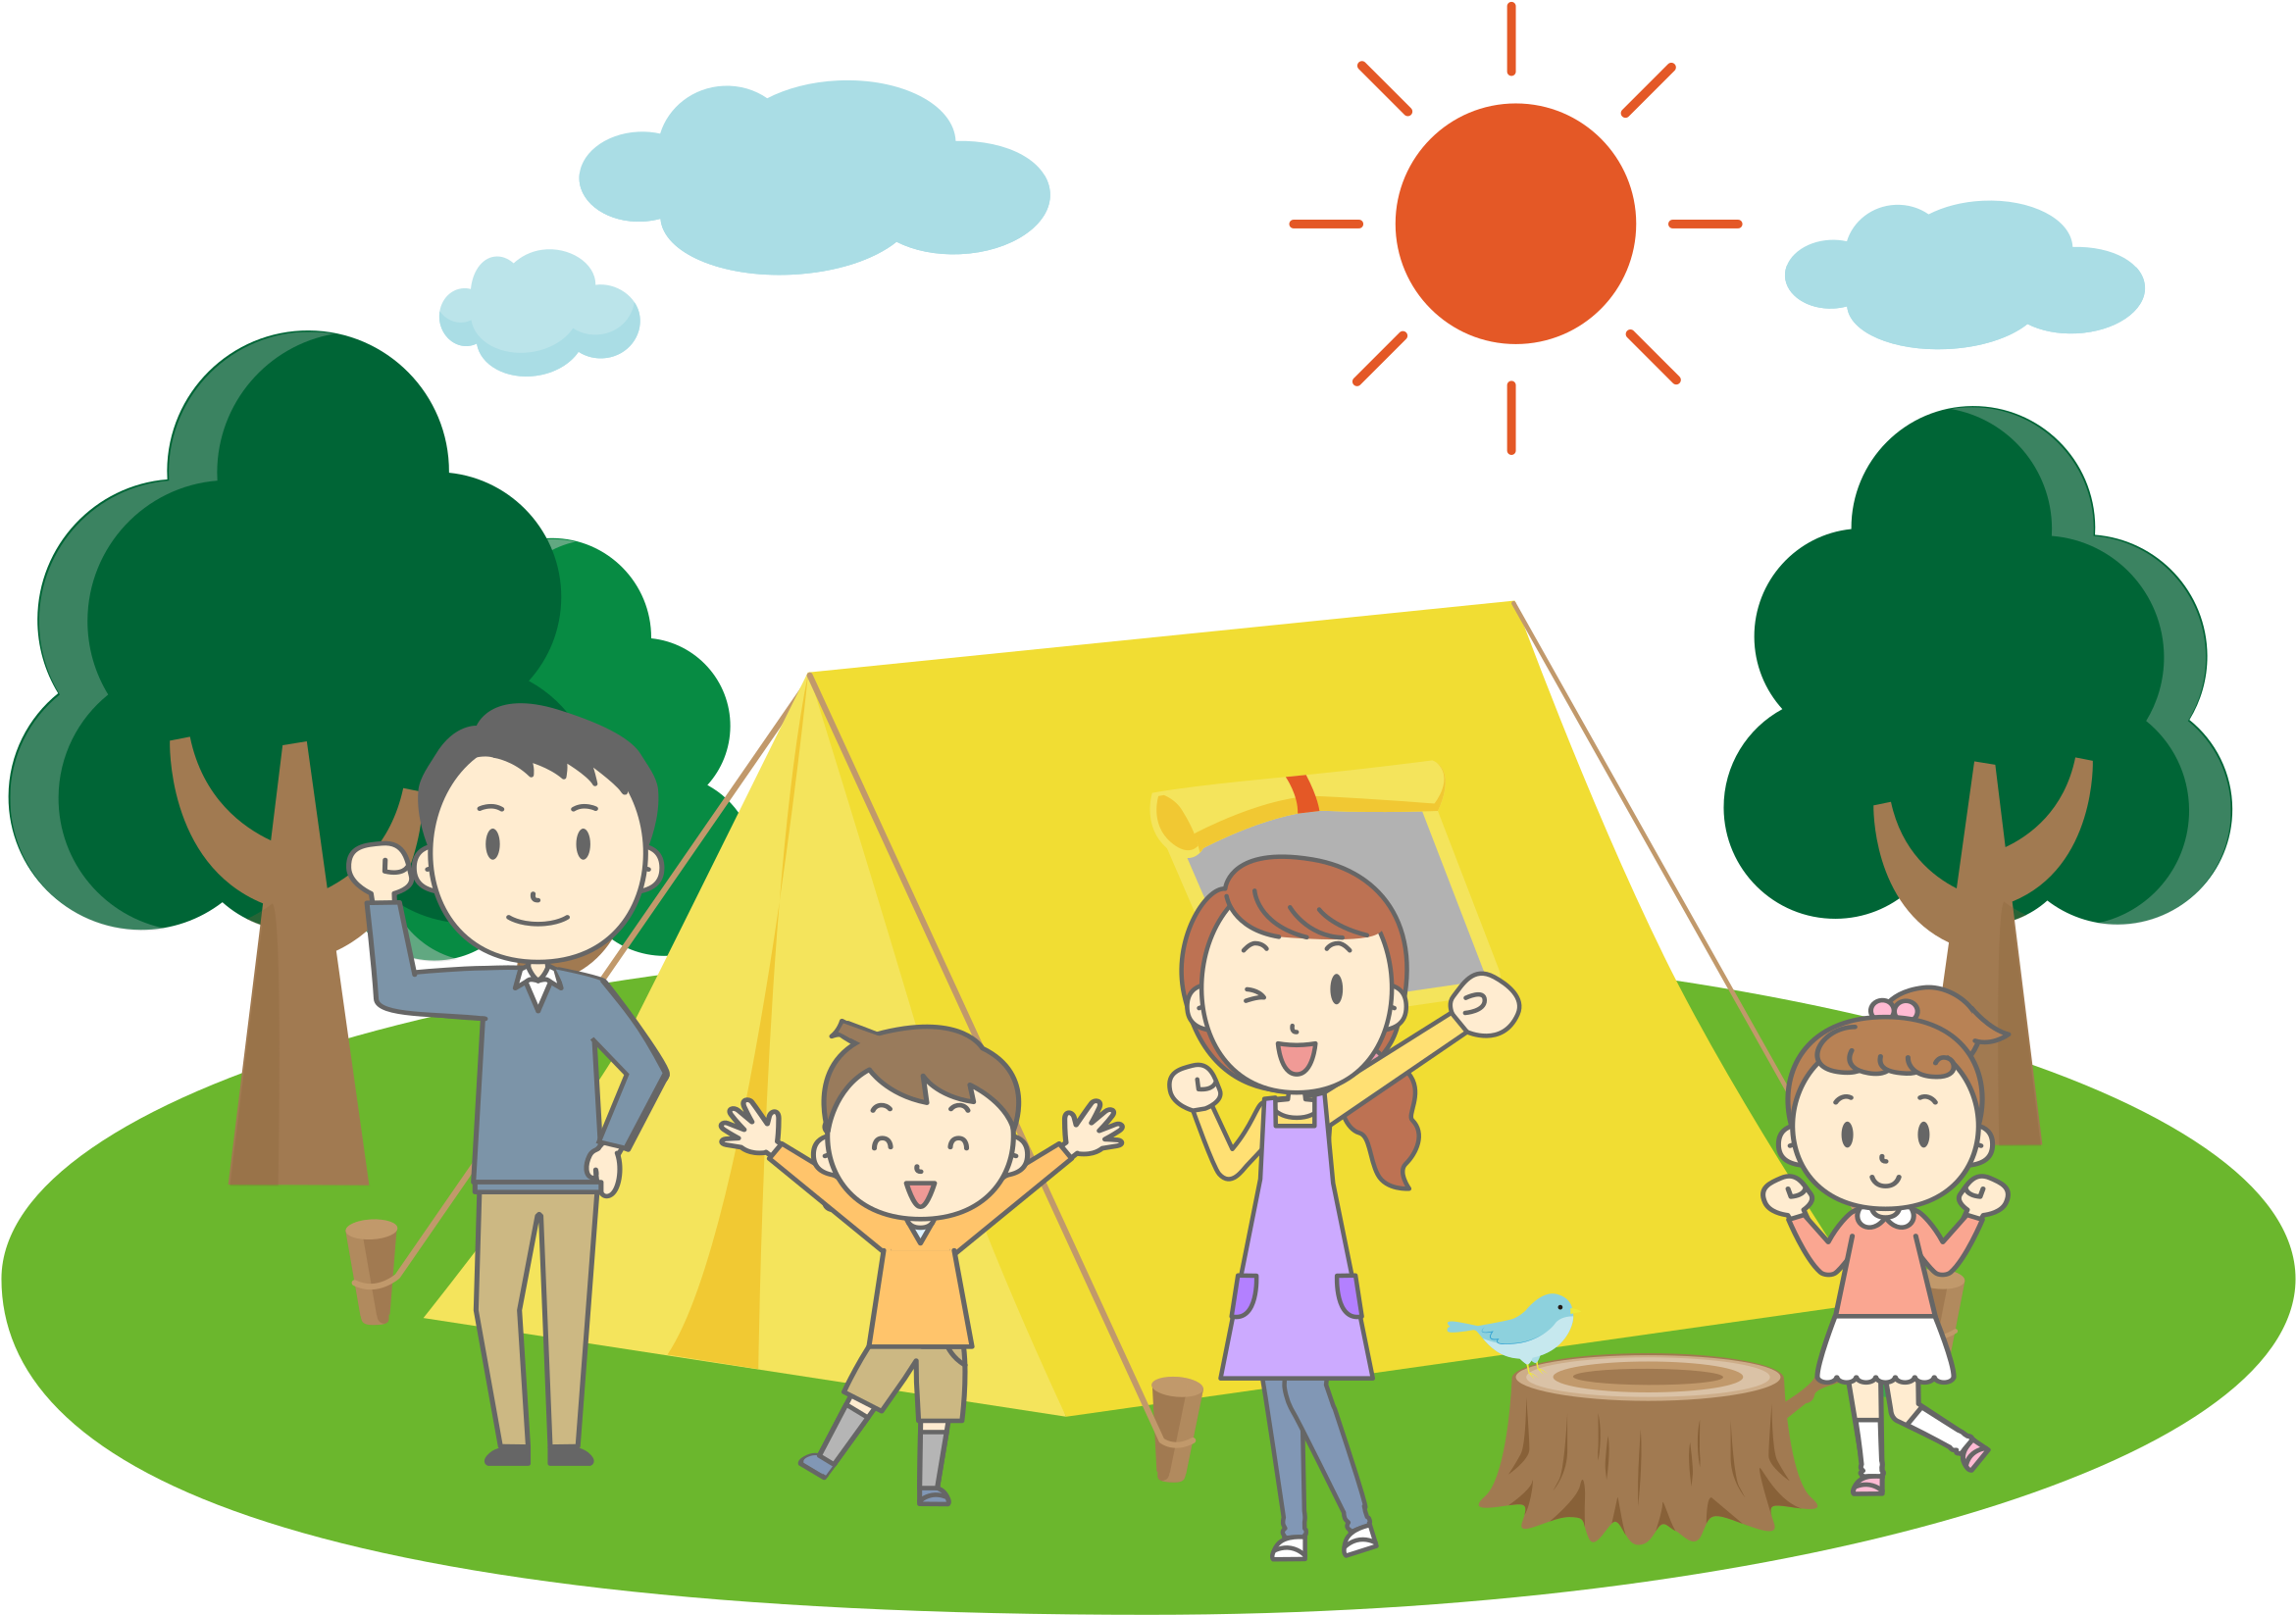 Please Go To The Event Facebook - Camping Clipart, Find more high quality f...